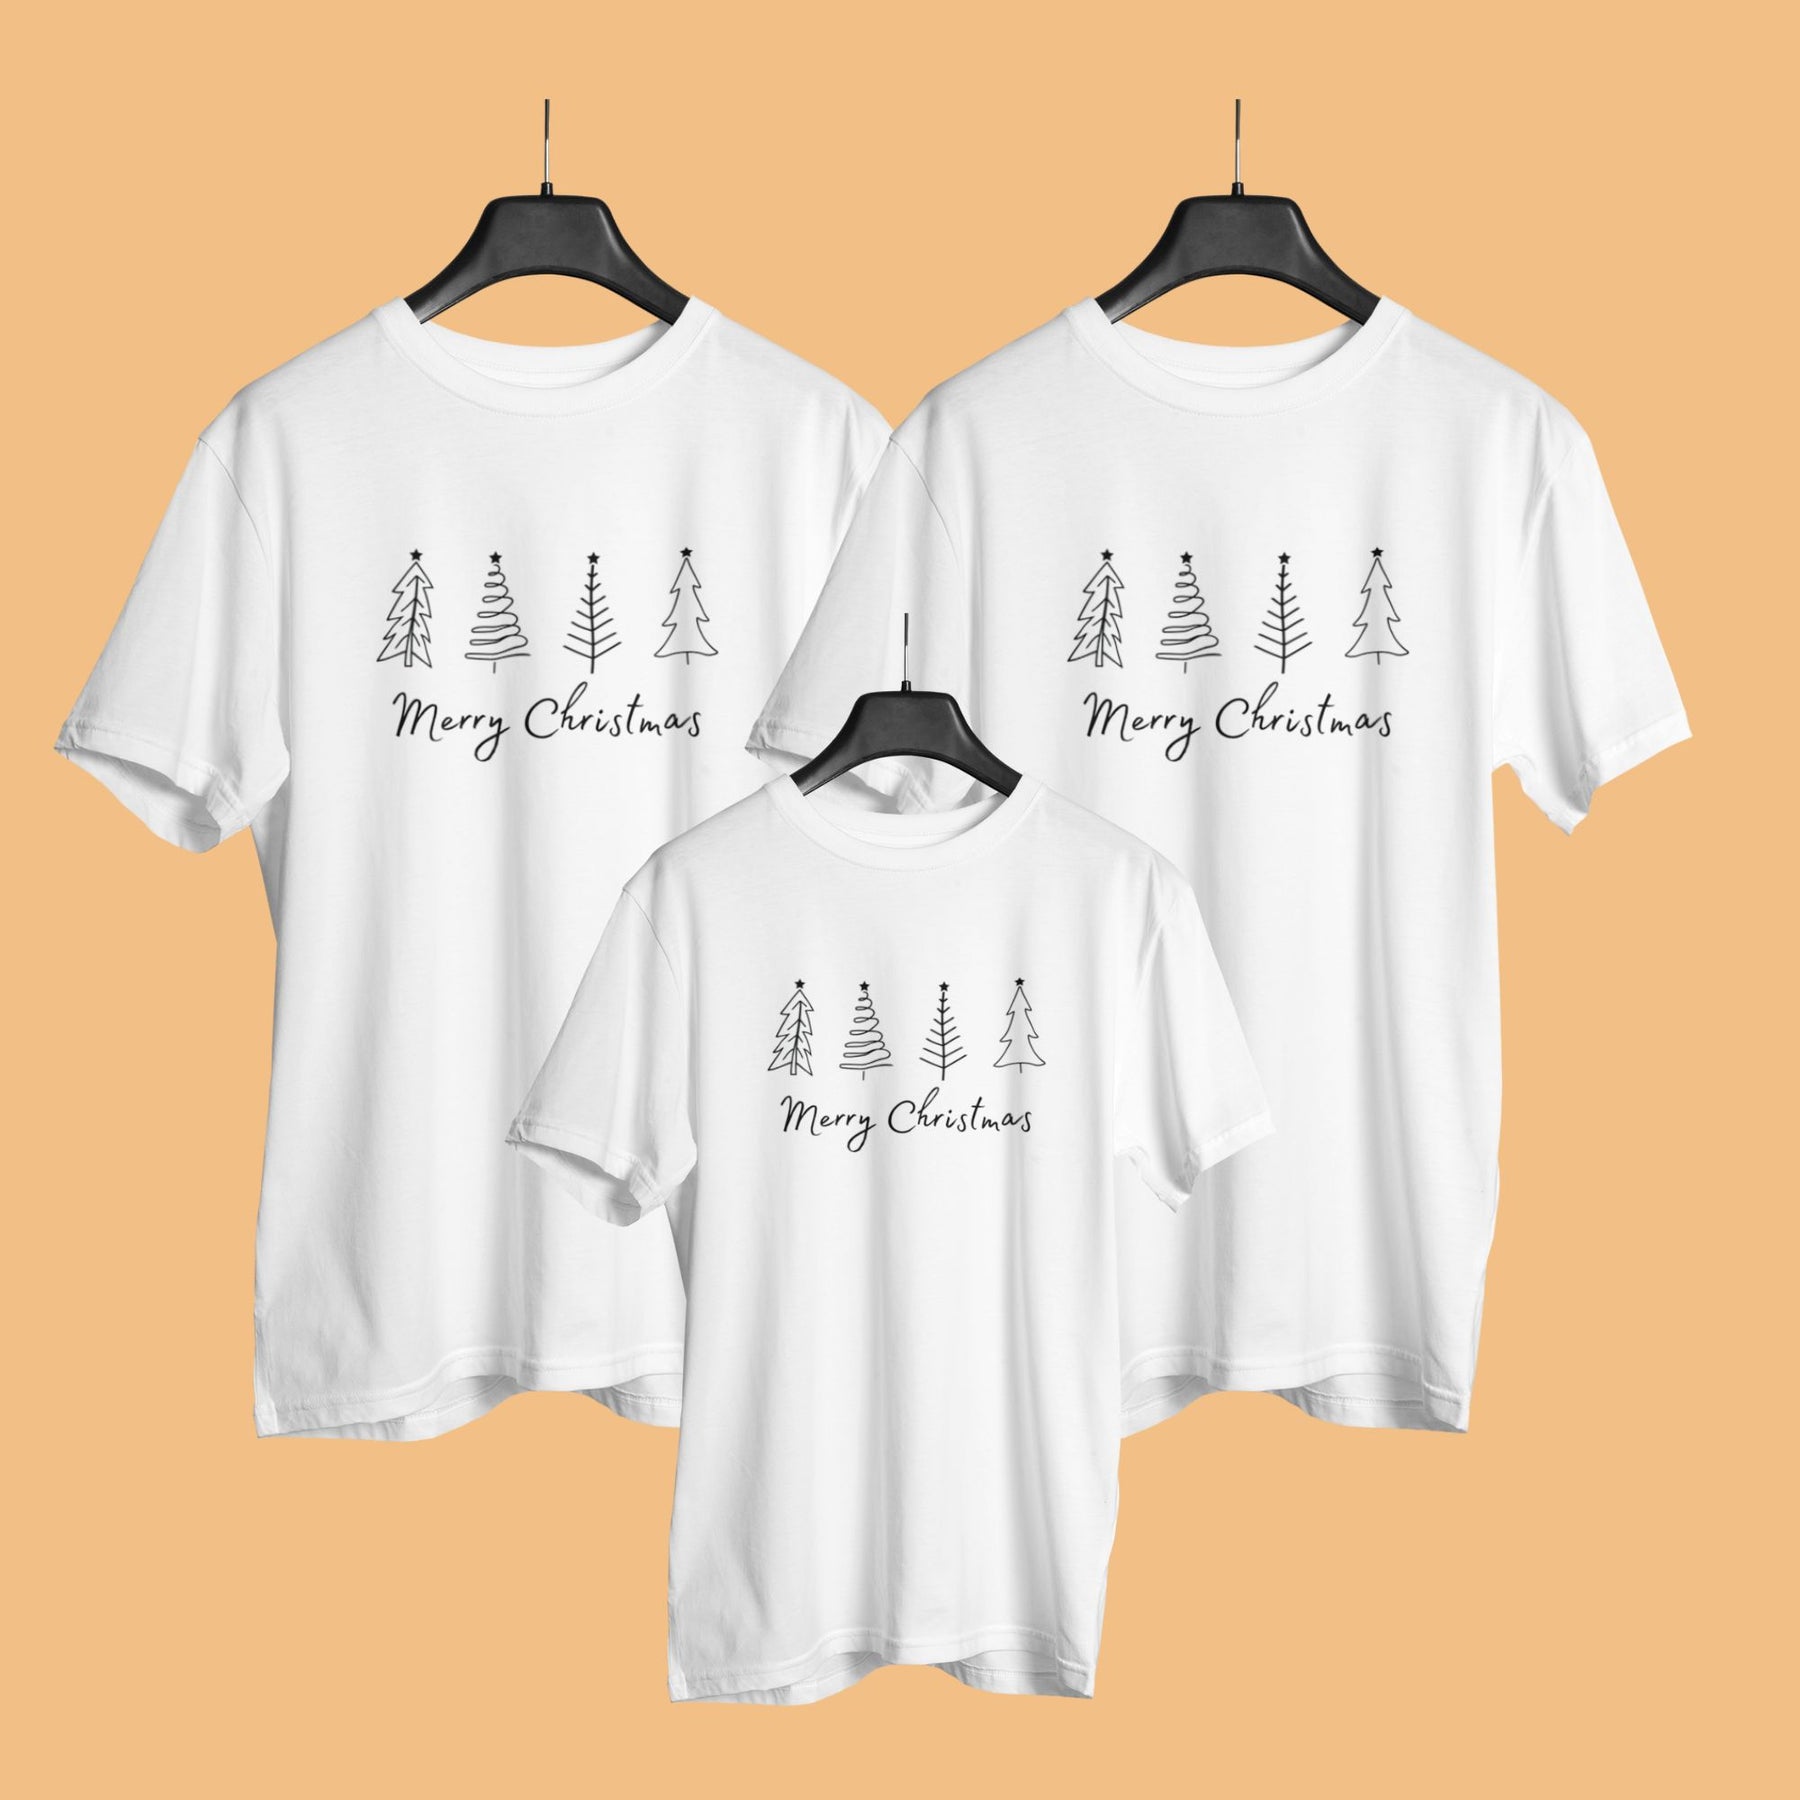 merry-christmas-matching-family-white-t-shirts-for-mom-dad-son-daughter-gogirgit-hanger